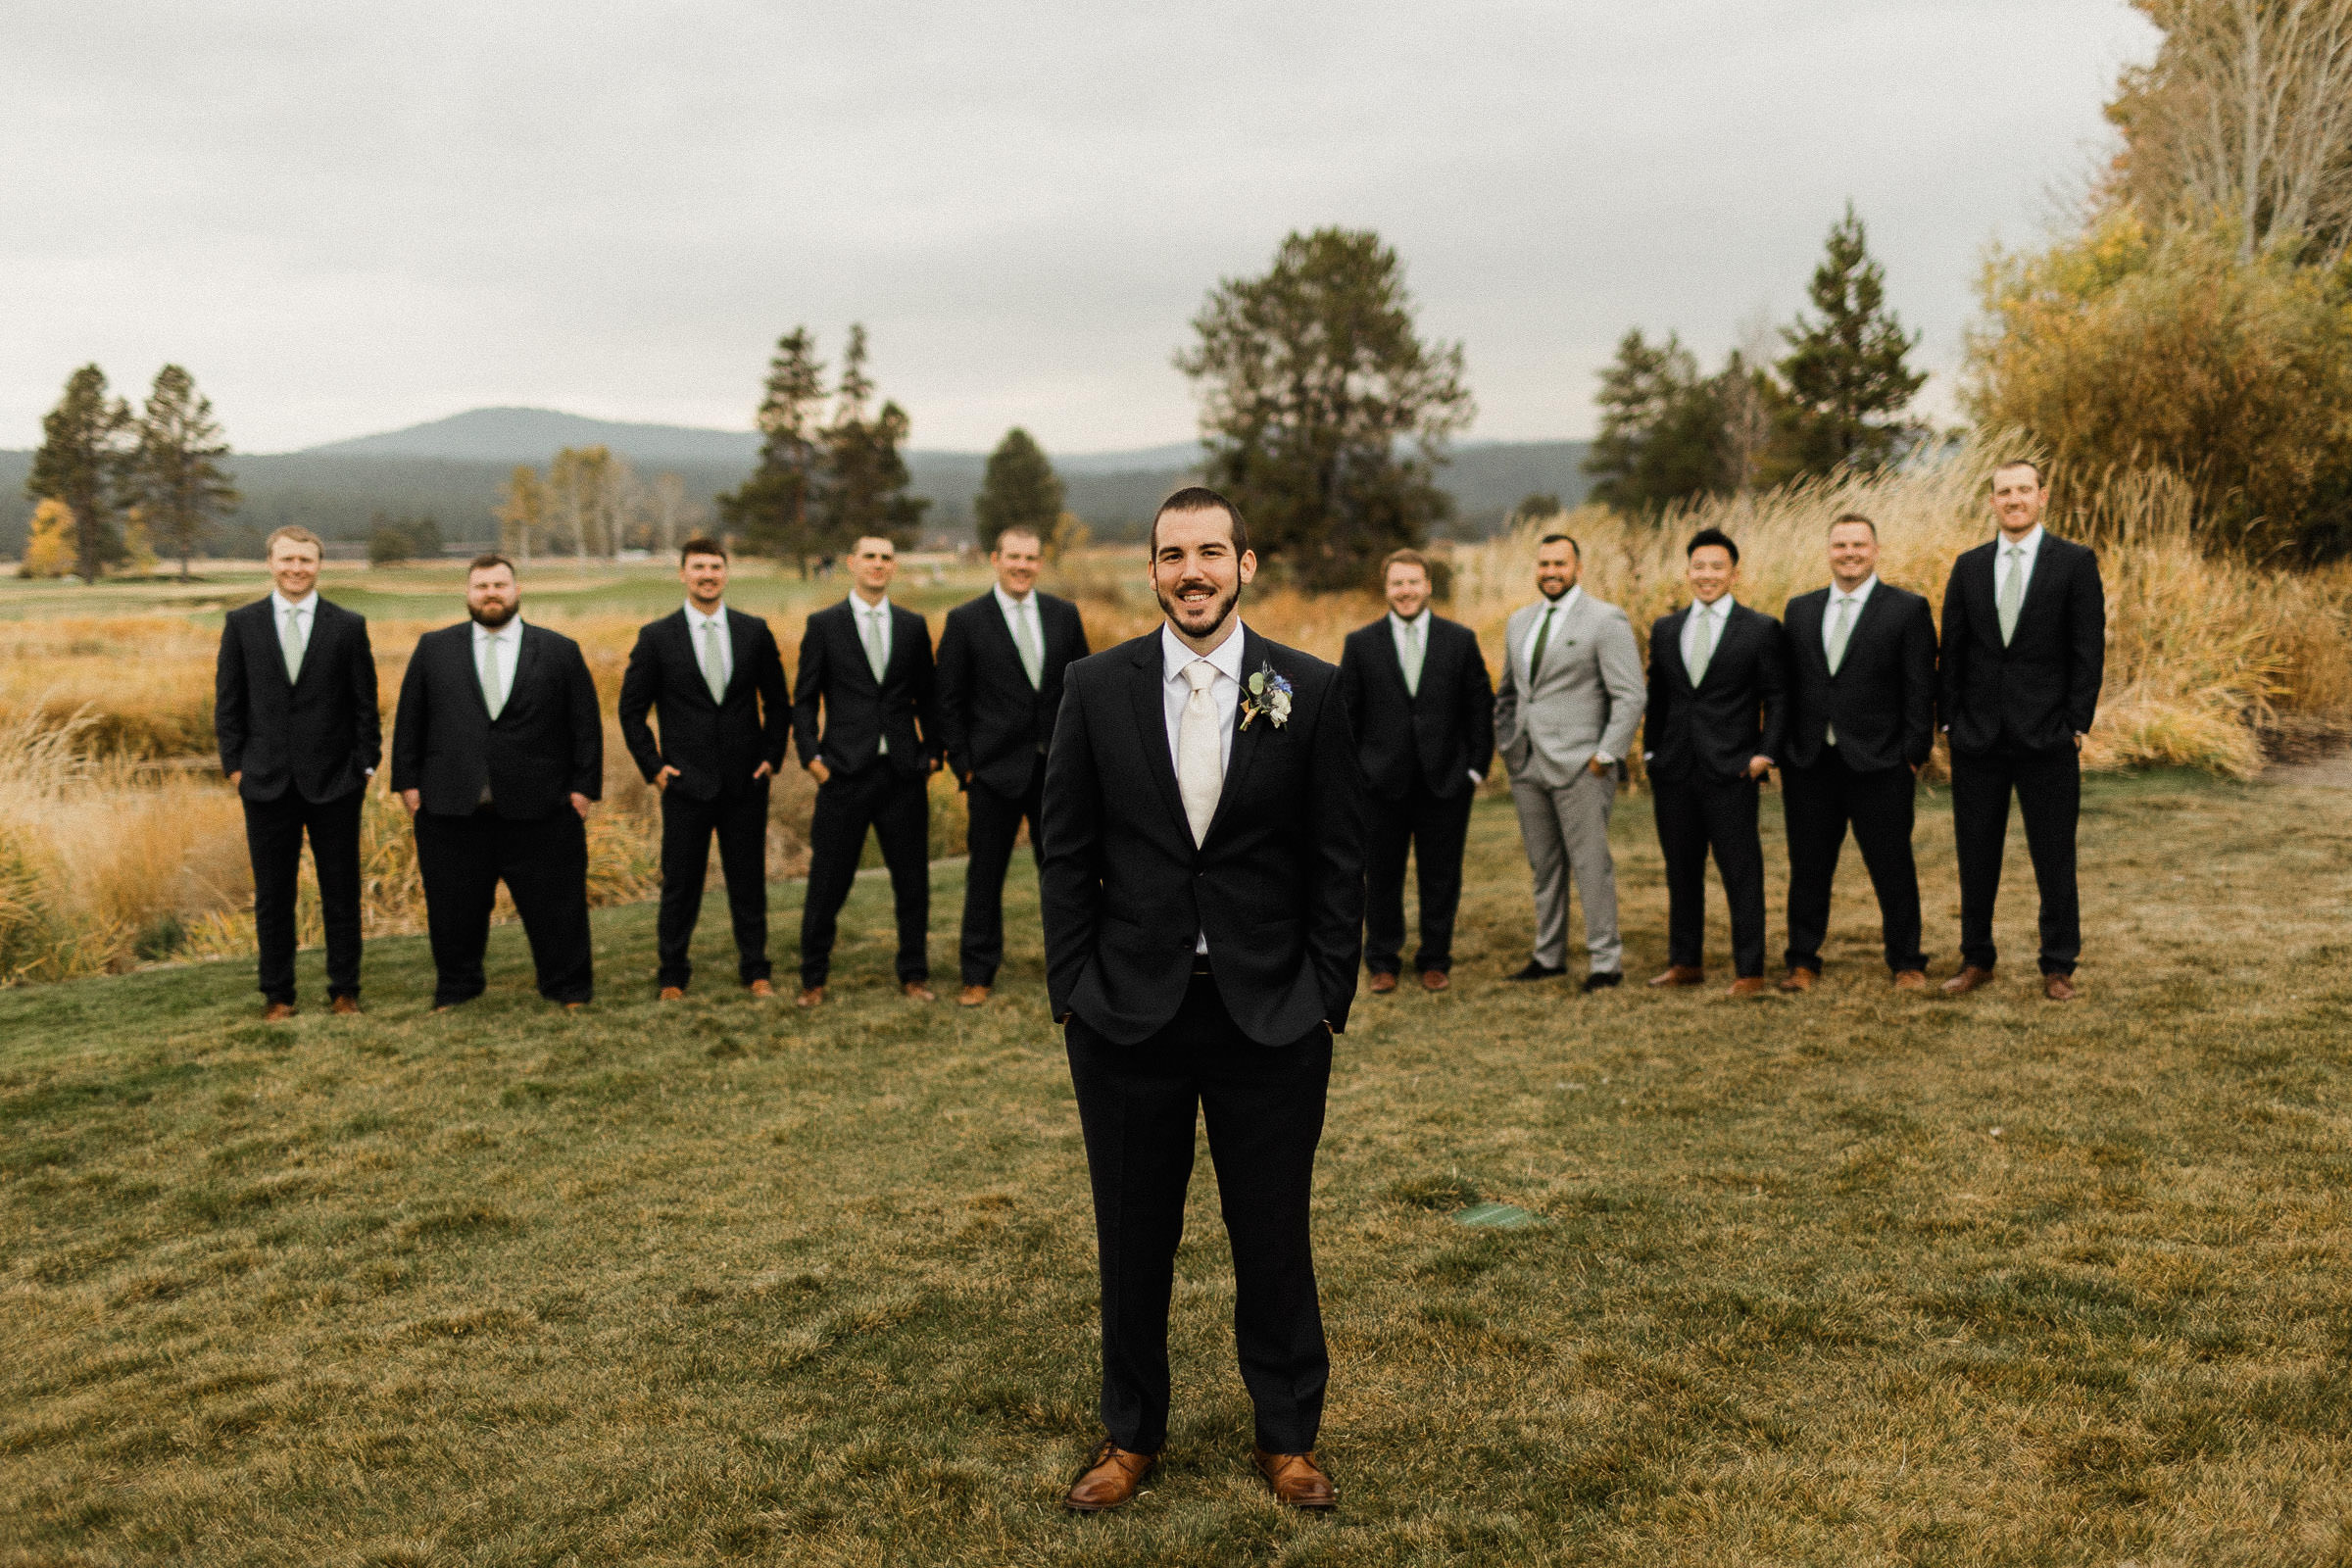 Groomsmen pose for a portrait on a lawn at Sunriver Resort